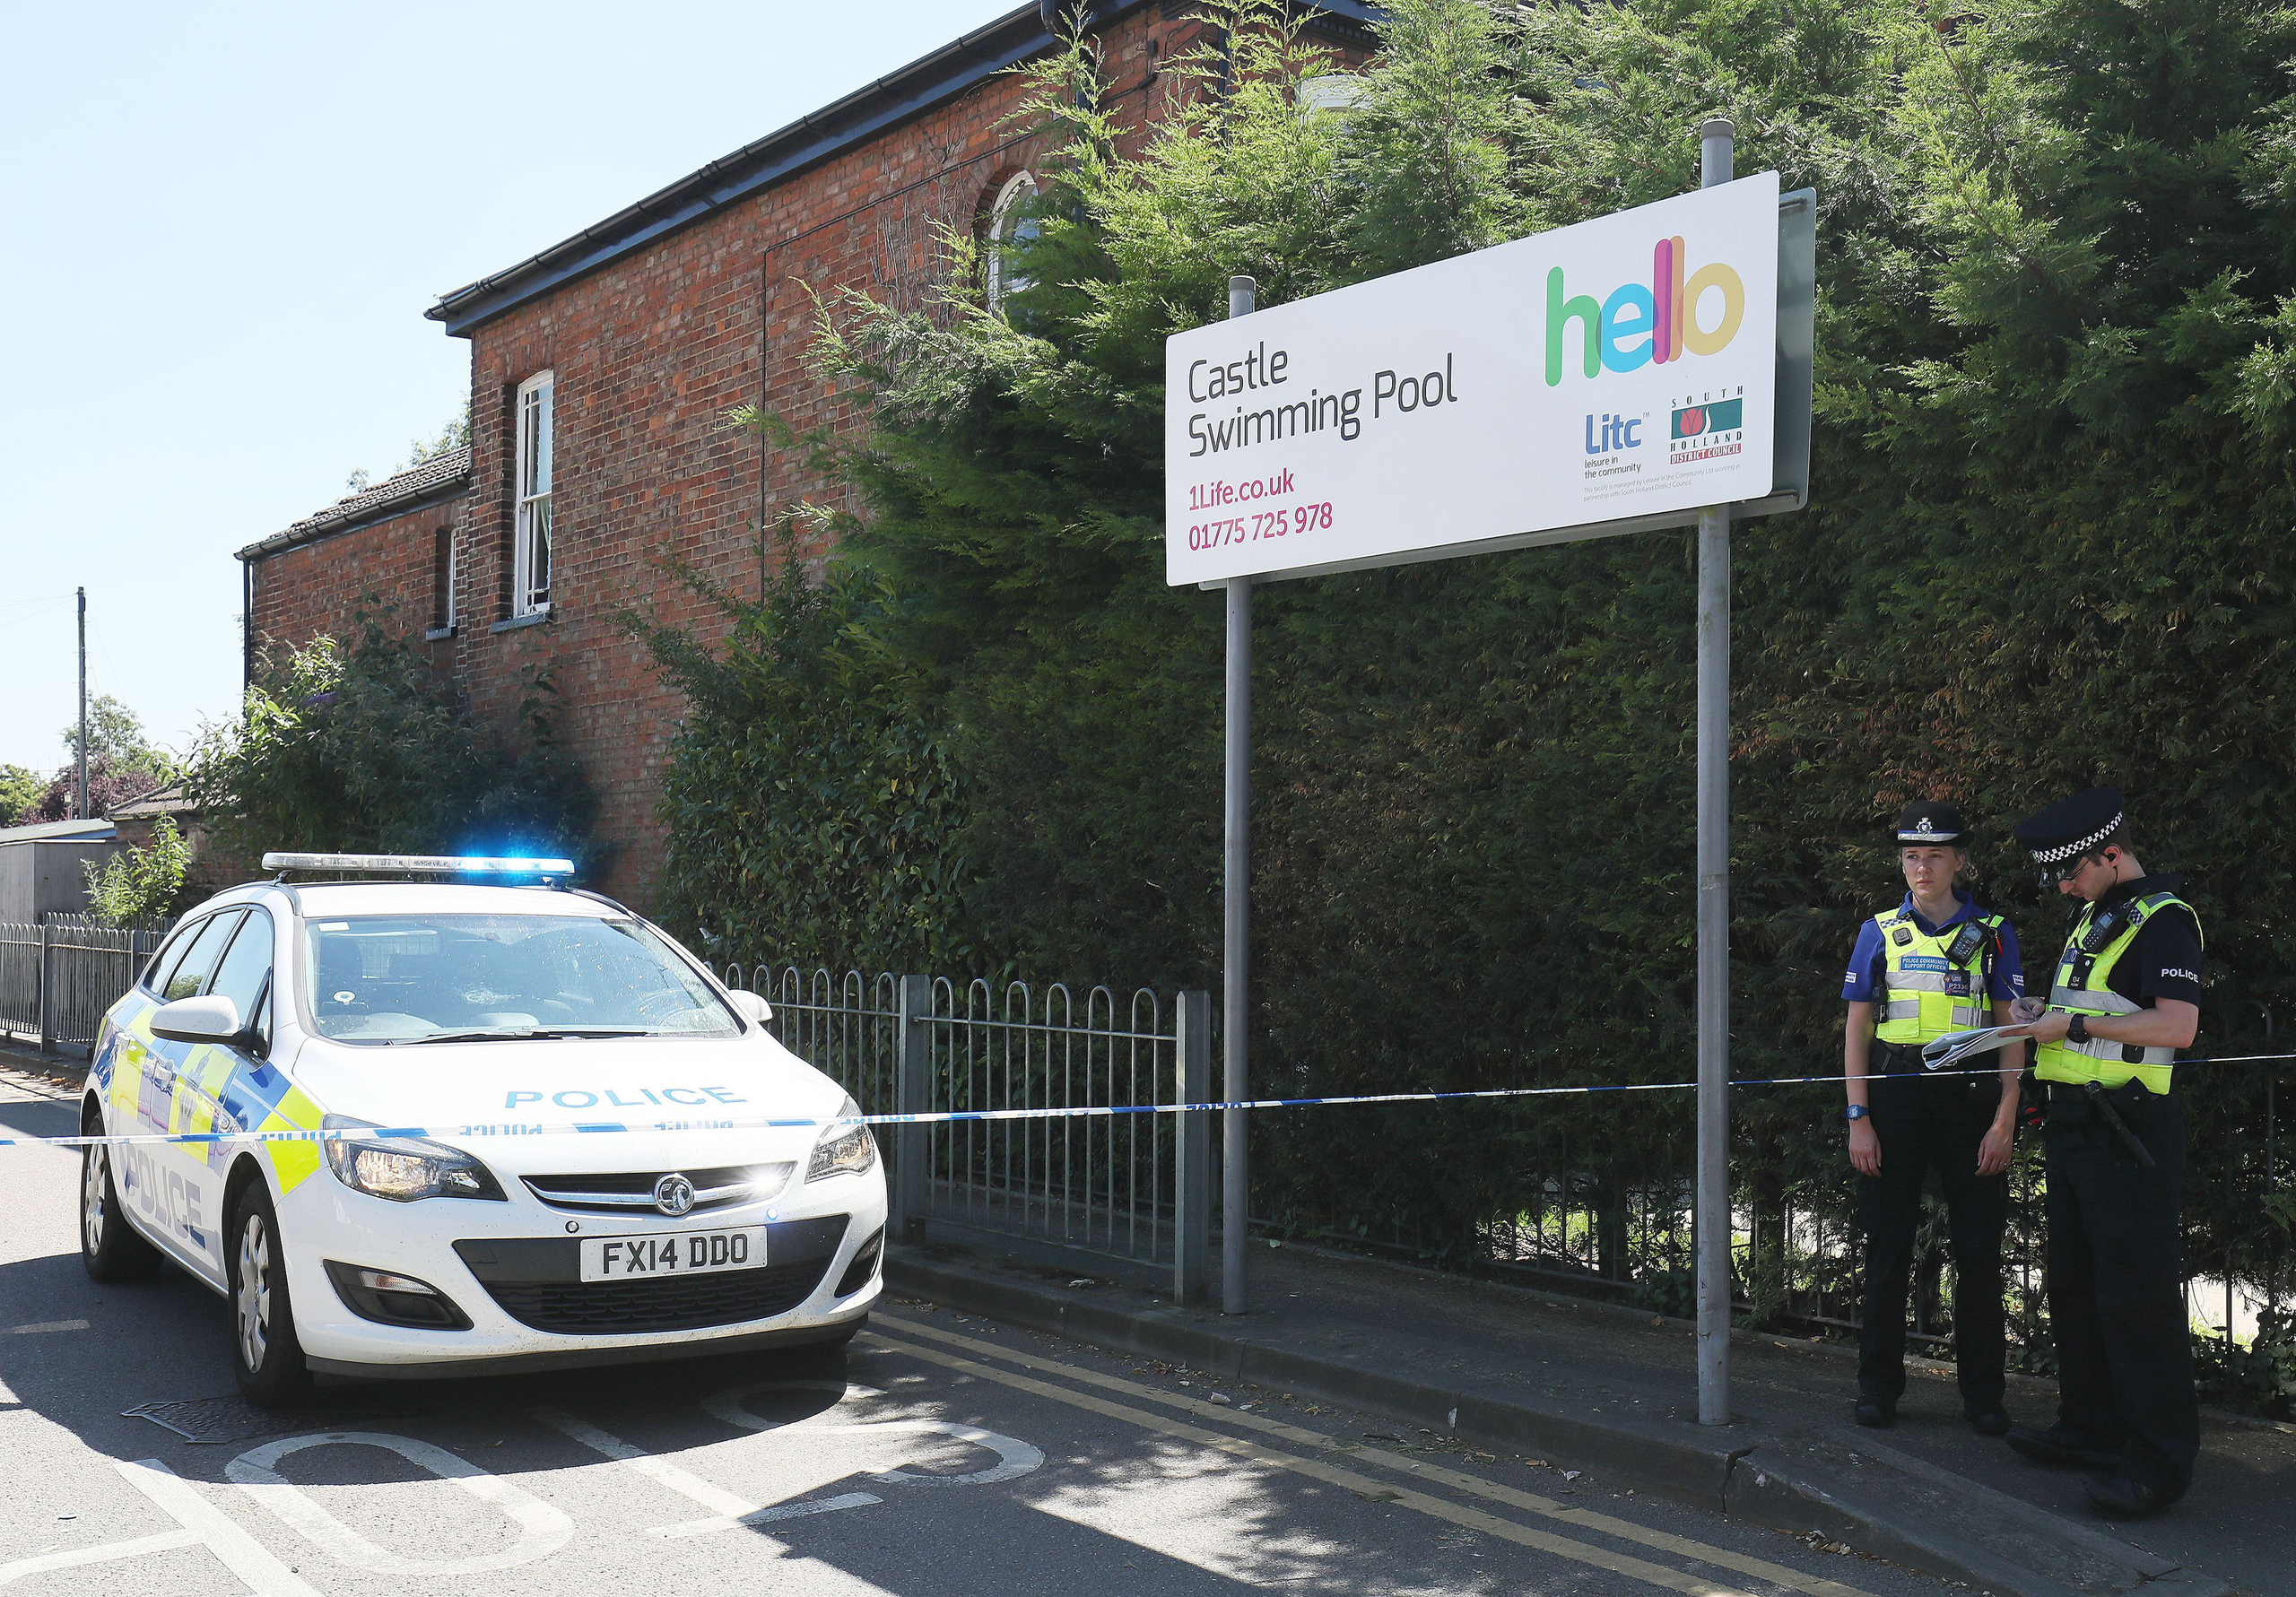 Emergency services at the scene near Castle Swimming Pool after three people including a suspected gunman have been shot dead in Spalding, Lincolnshire on July 19, 2016. (PA Images/Sipa USA)